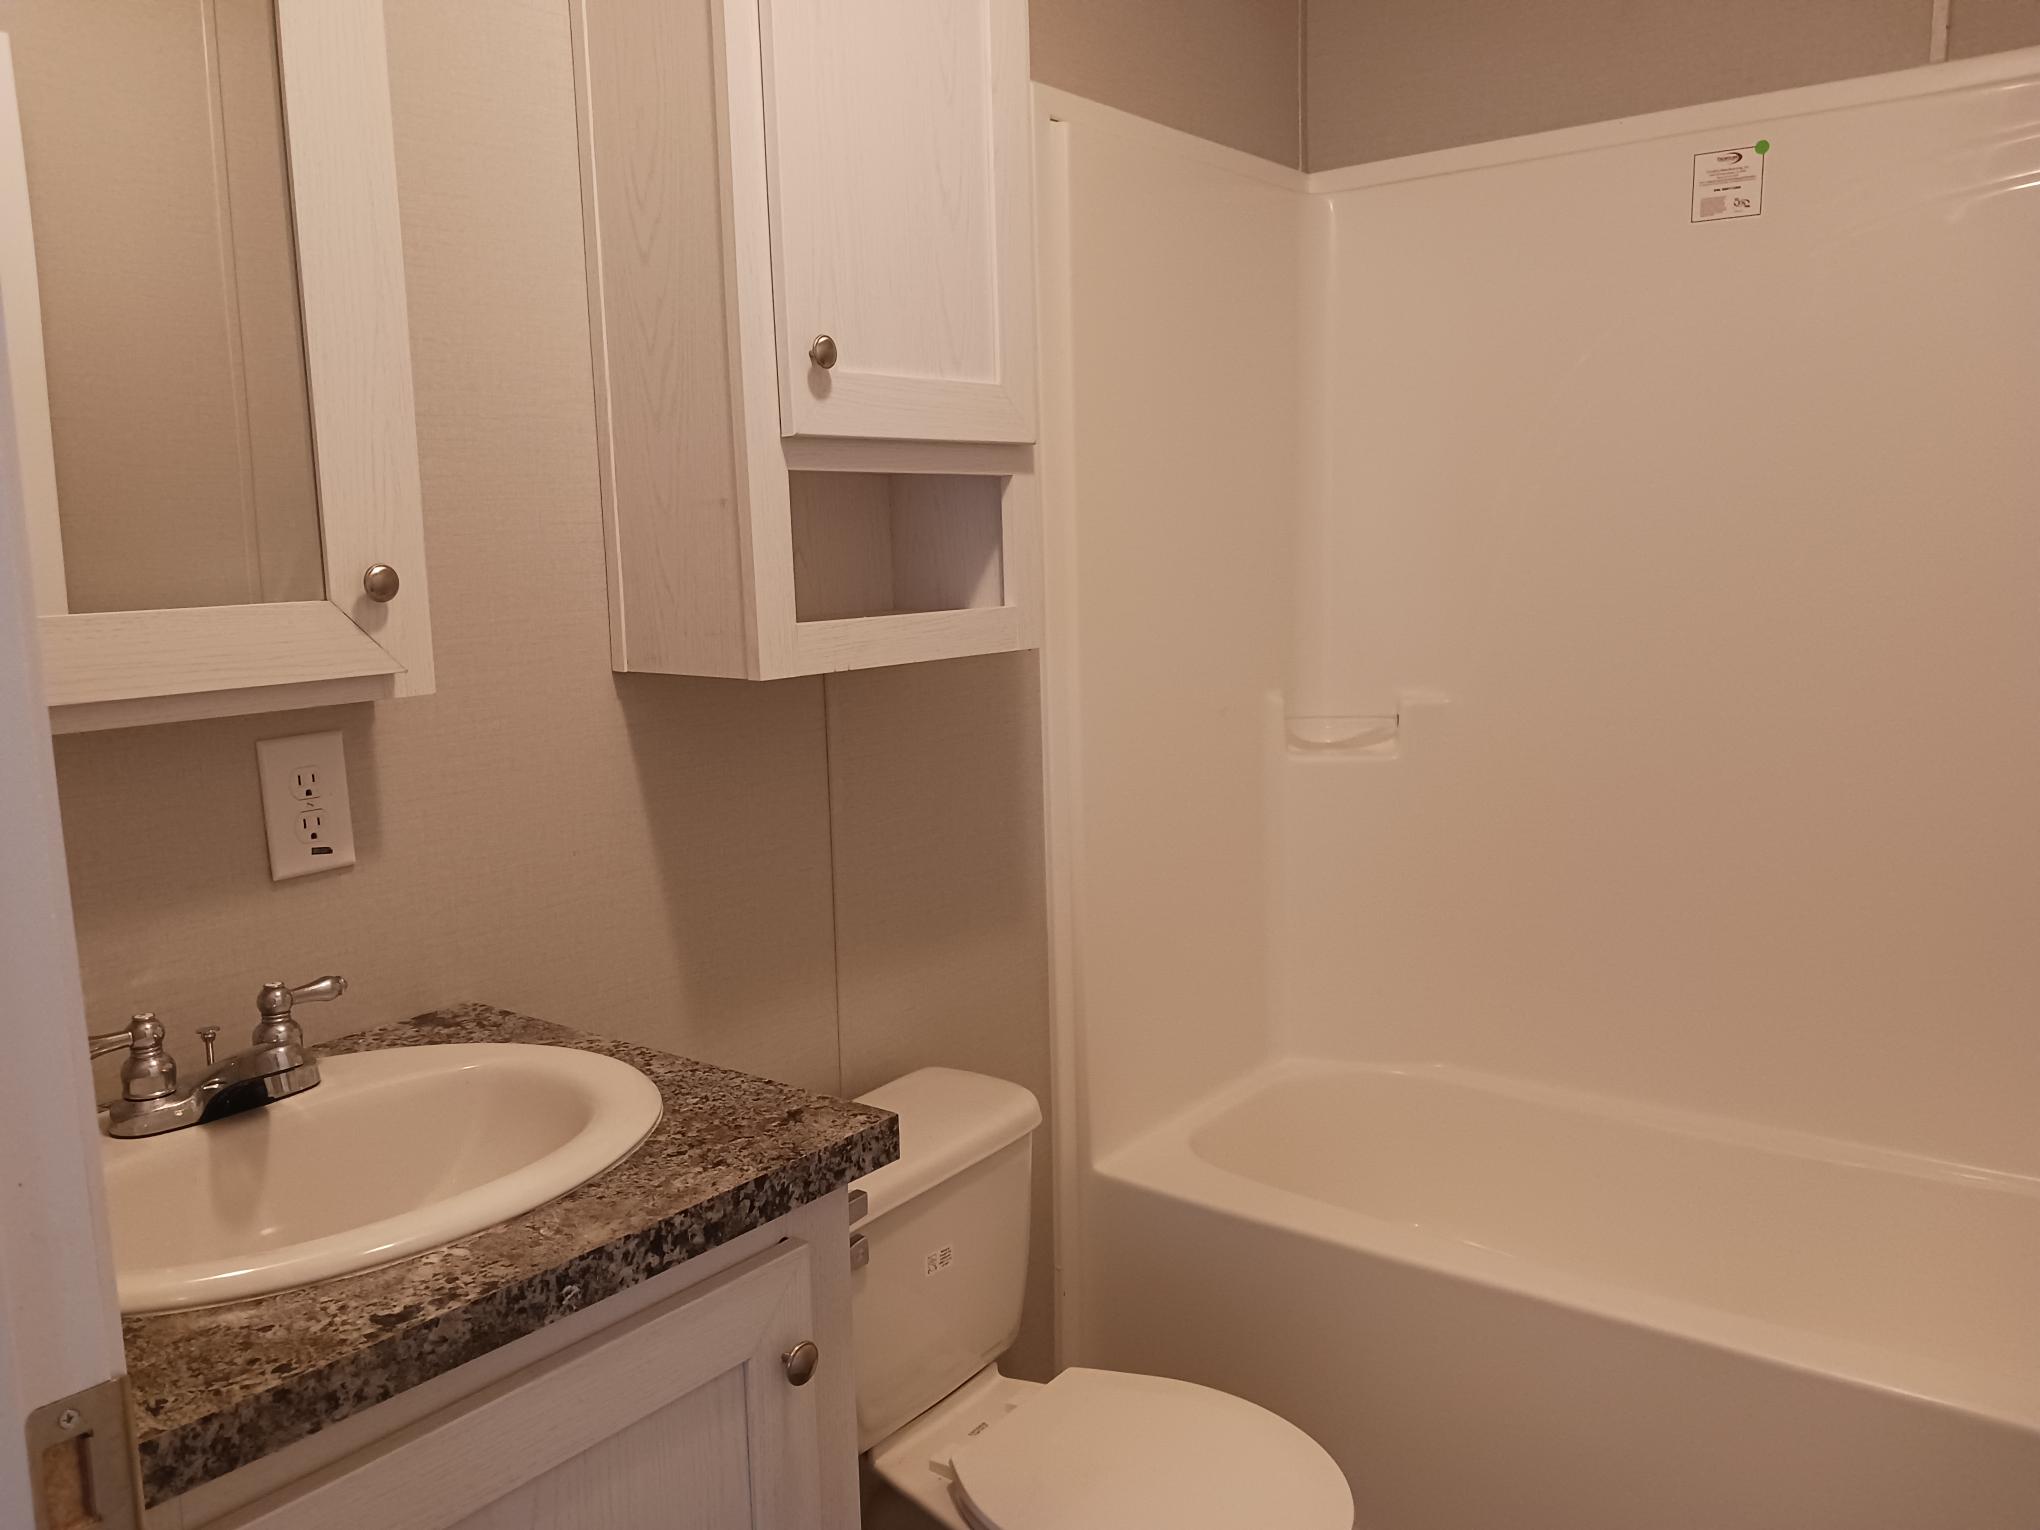 NEW HOME – UPGRADED AMENITIES